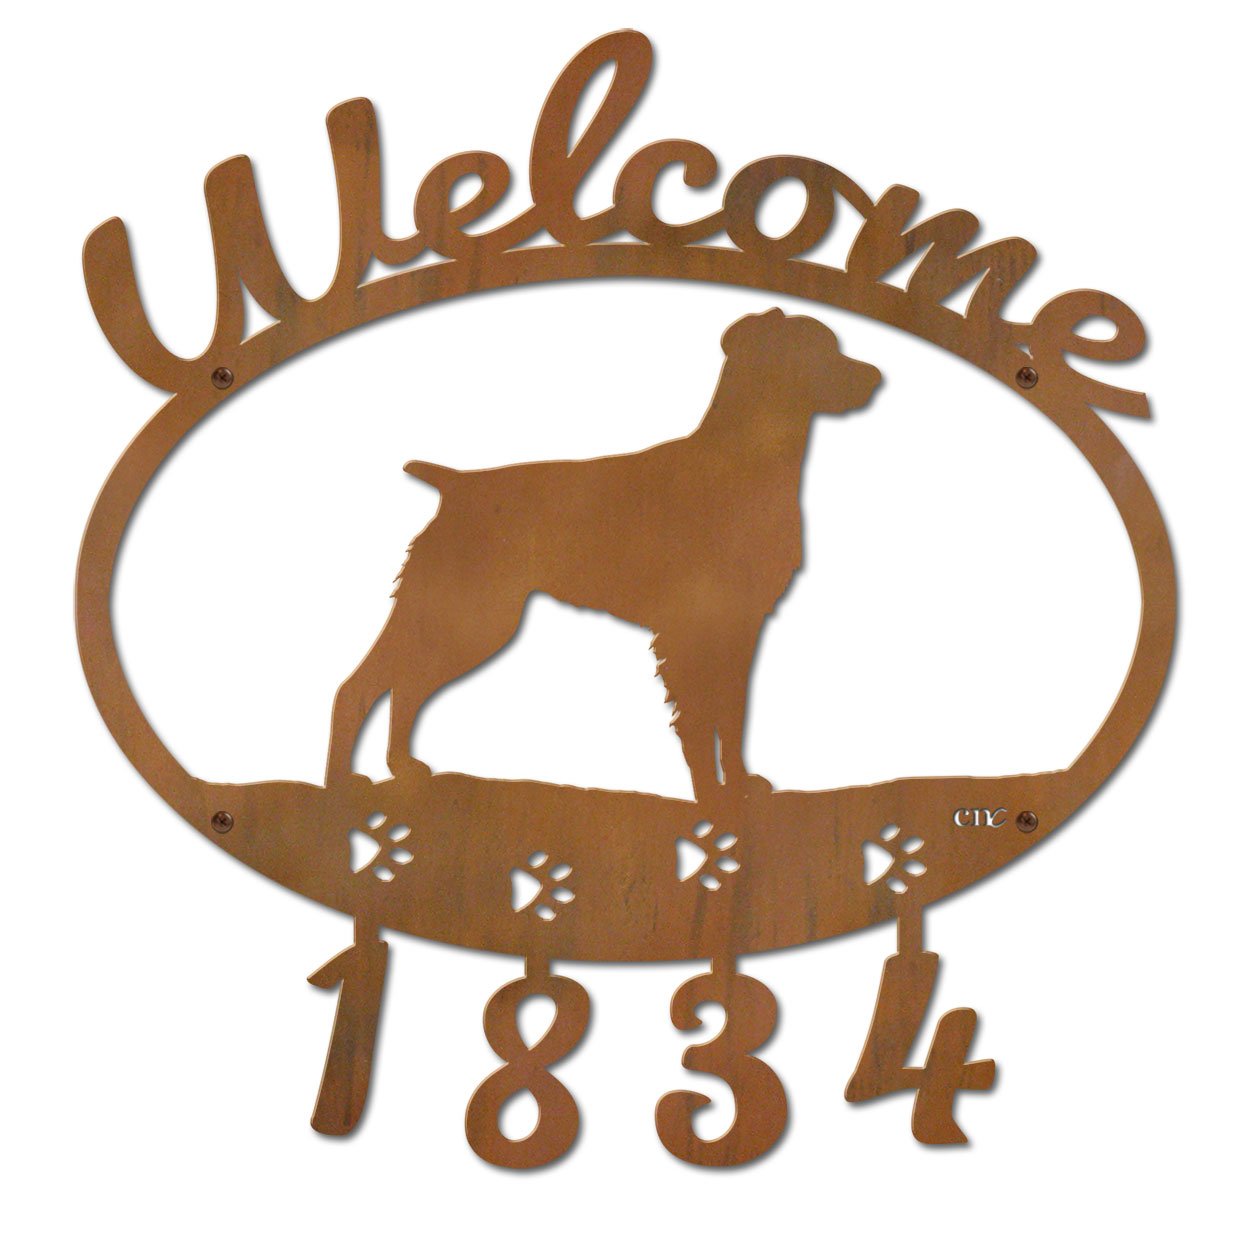 601335 - Brittany Spaniel Welcome Custom House Numbers